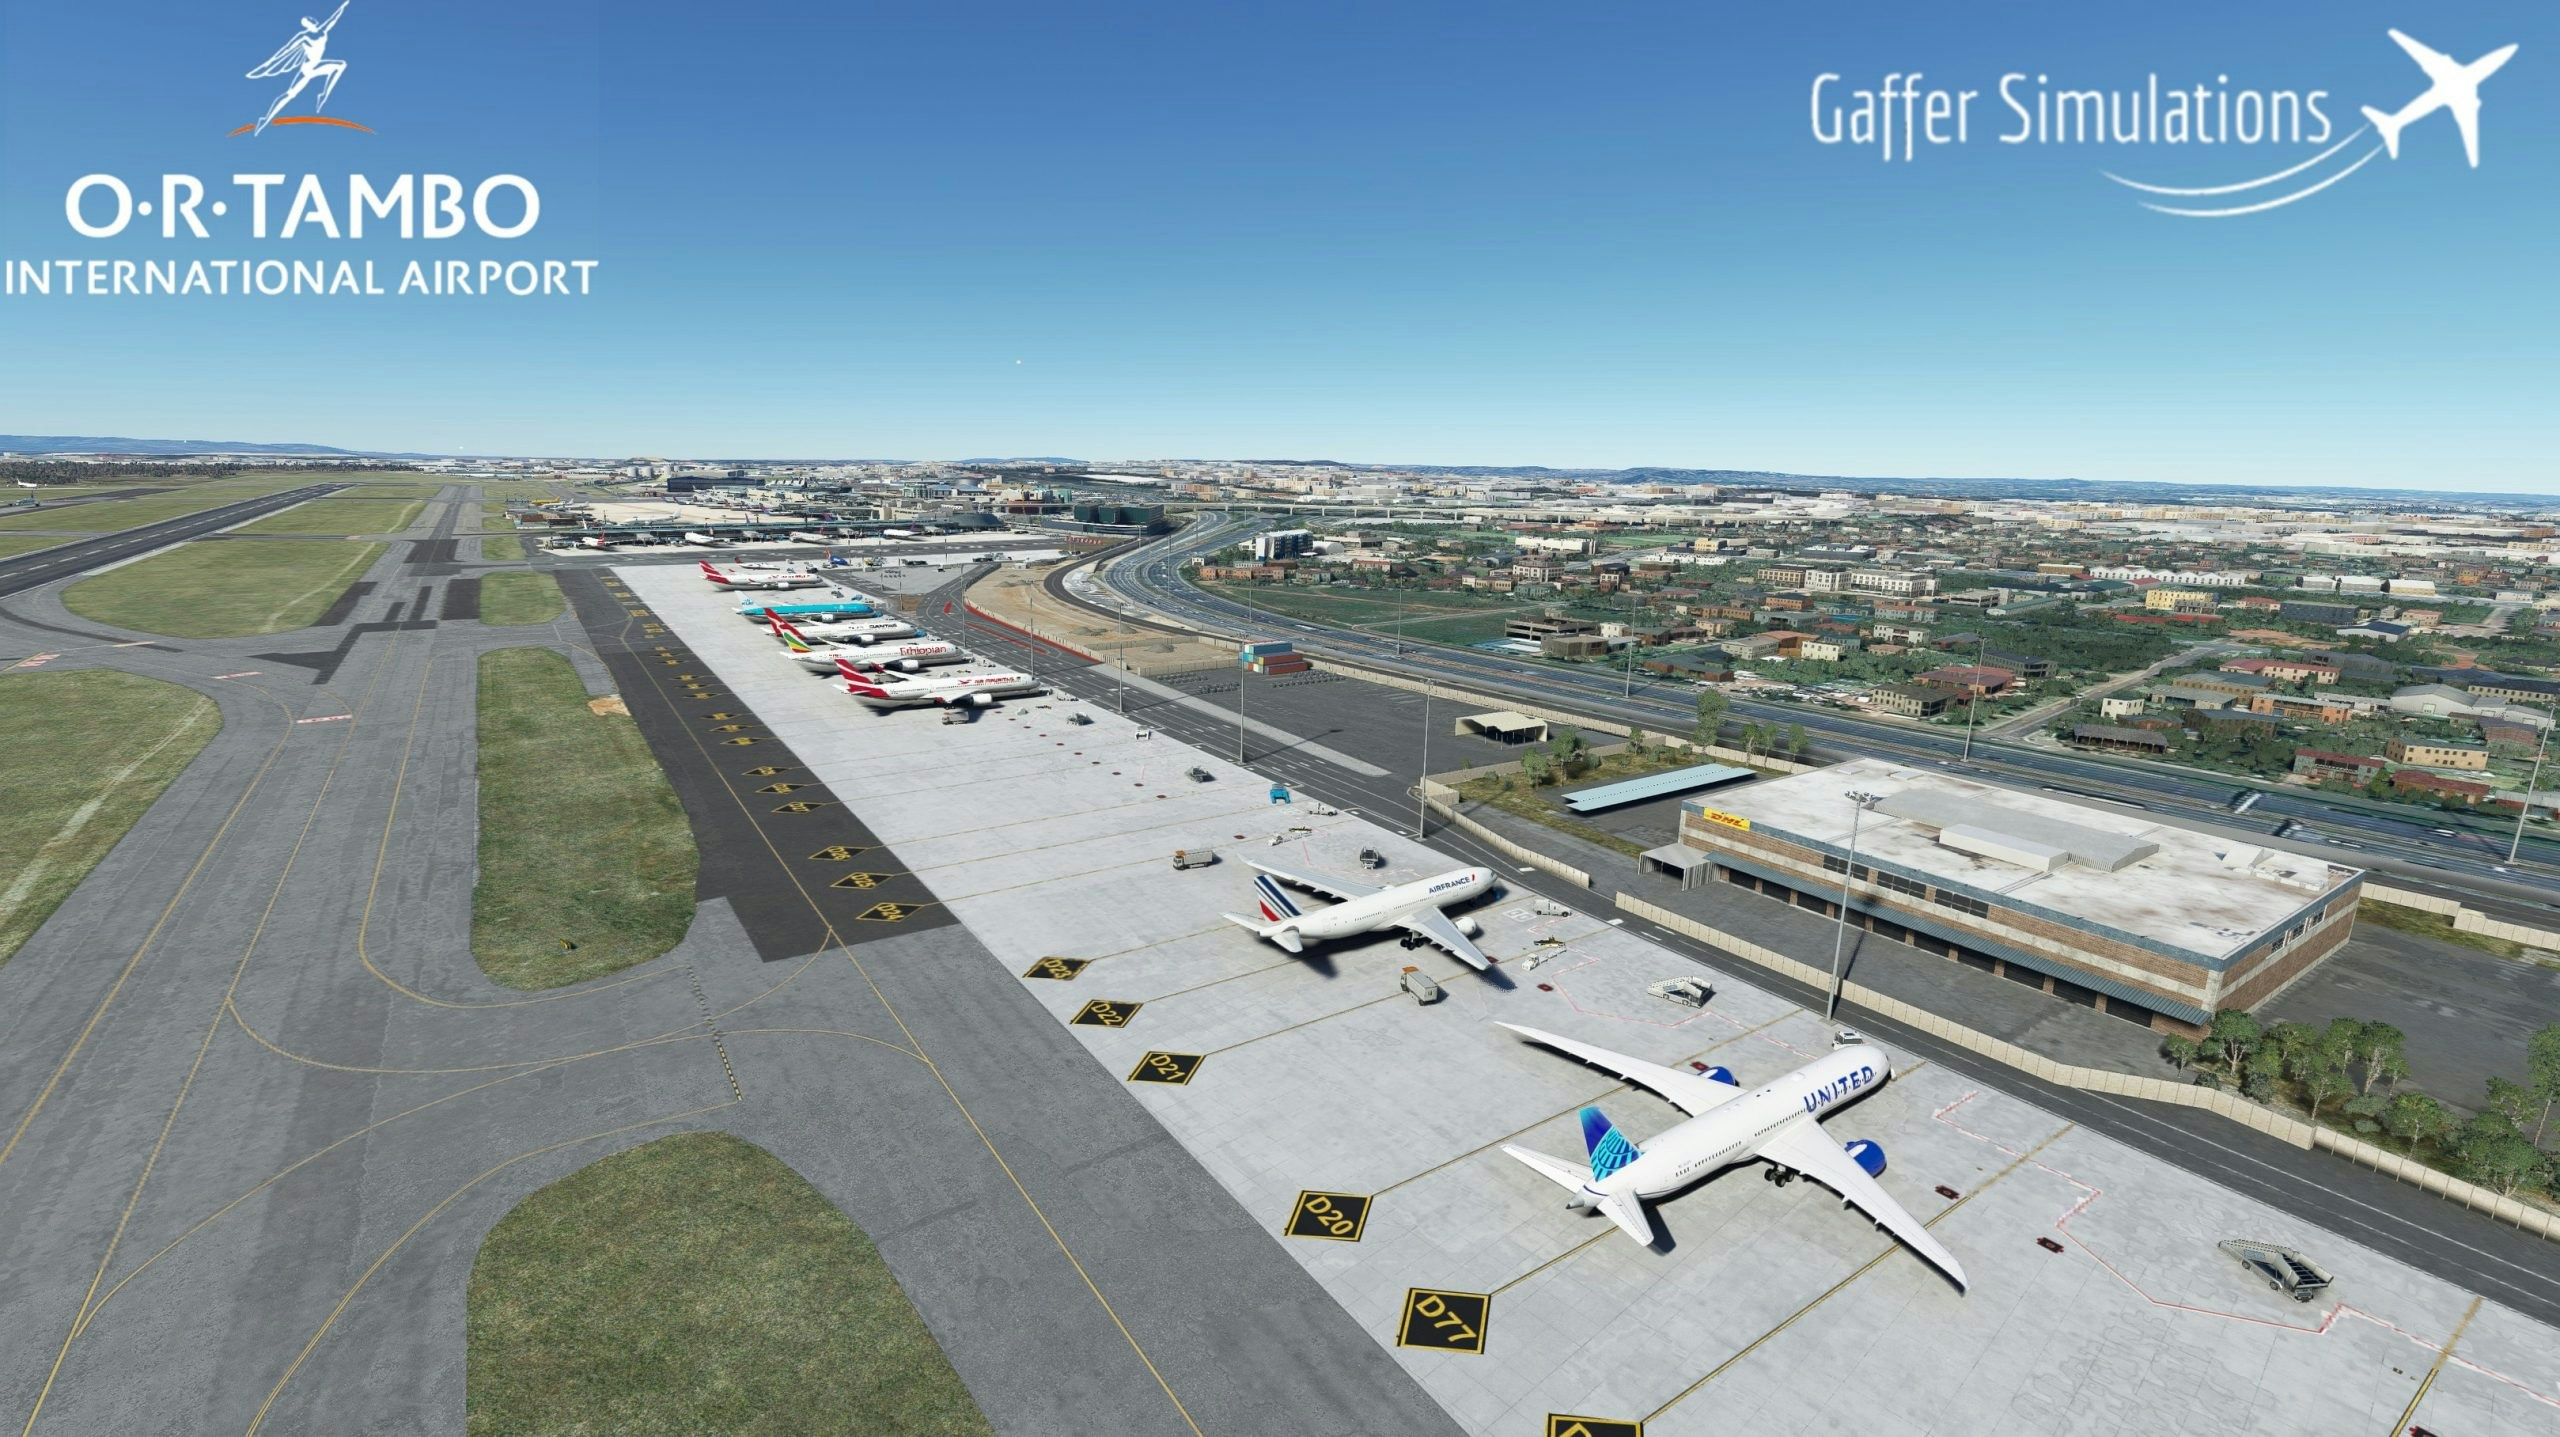 GafferSimulations releases O.R. Tambo International Airport for MSFS